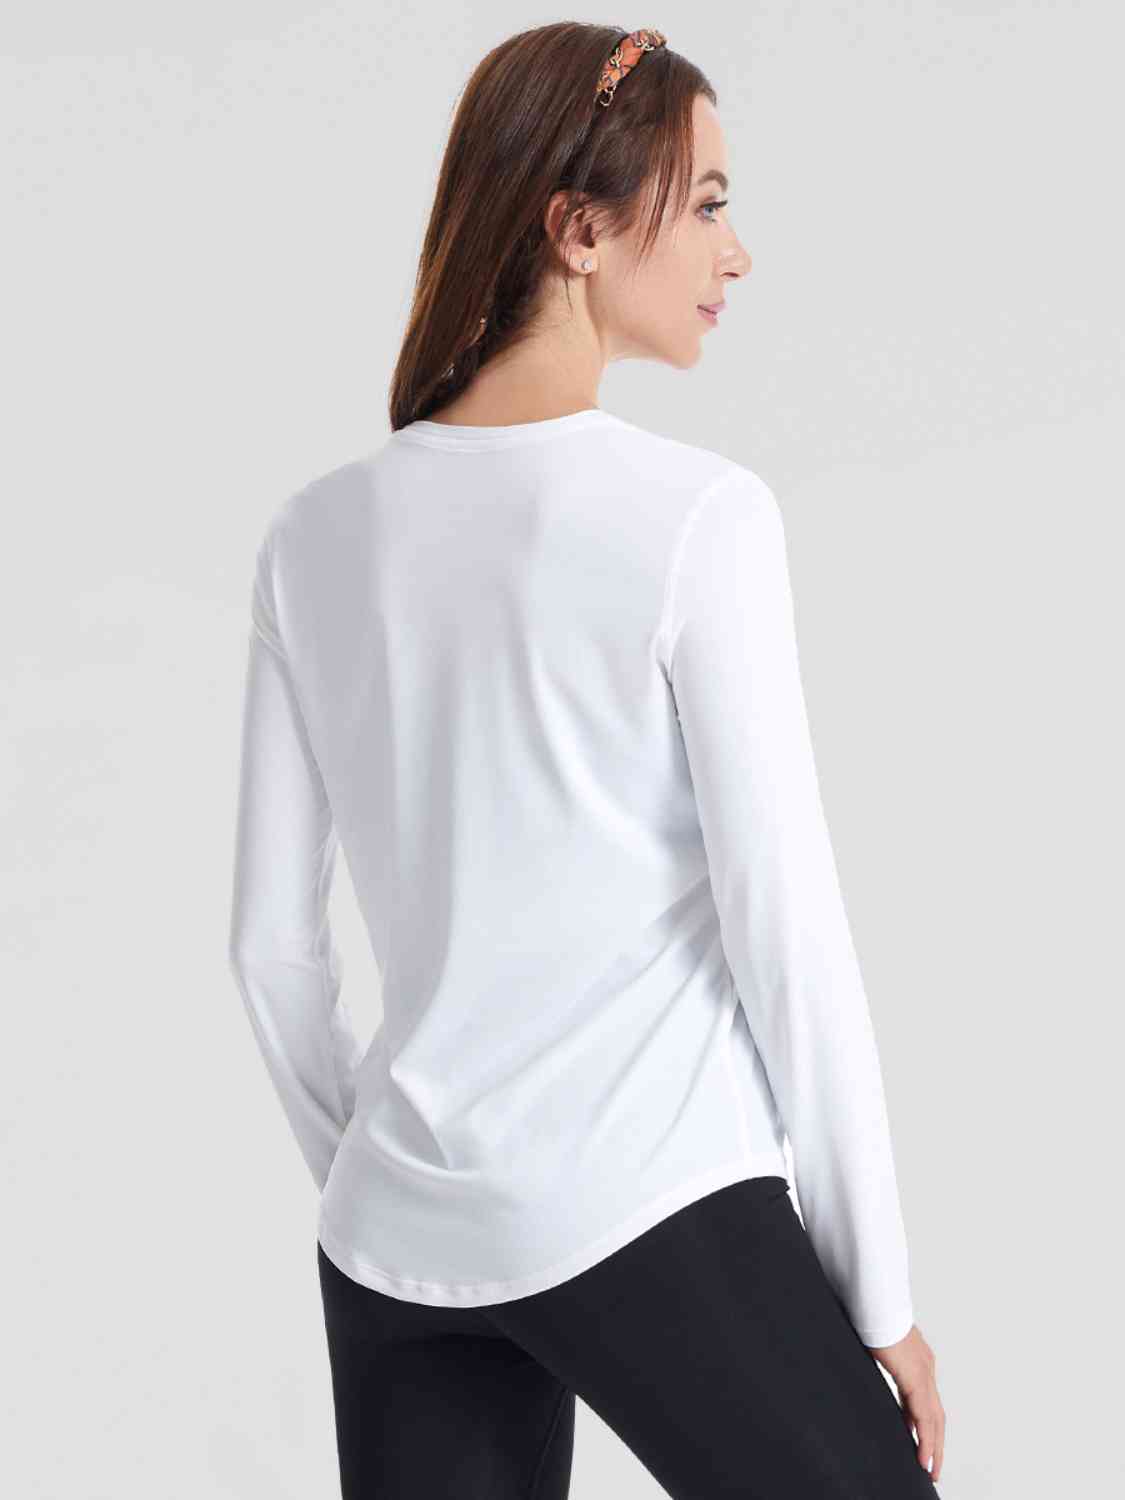 Round Neck Long Sleeve Sports Top